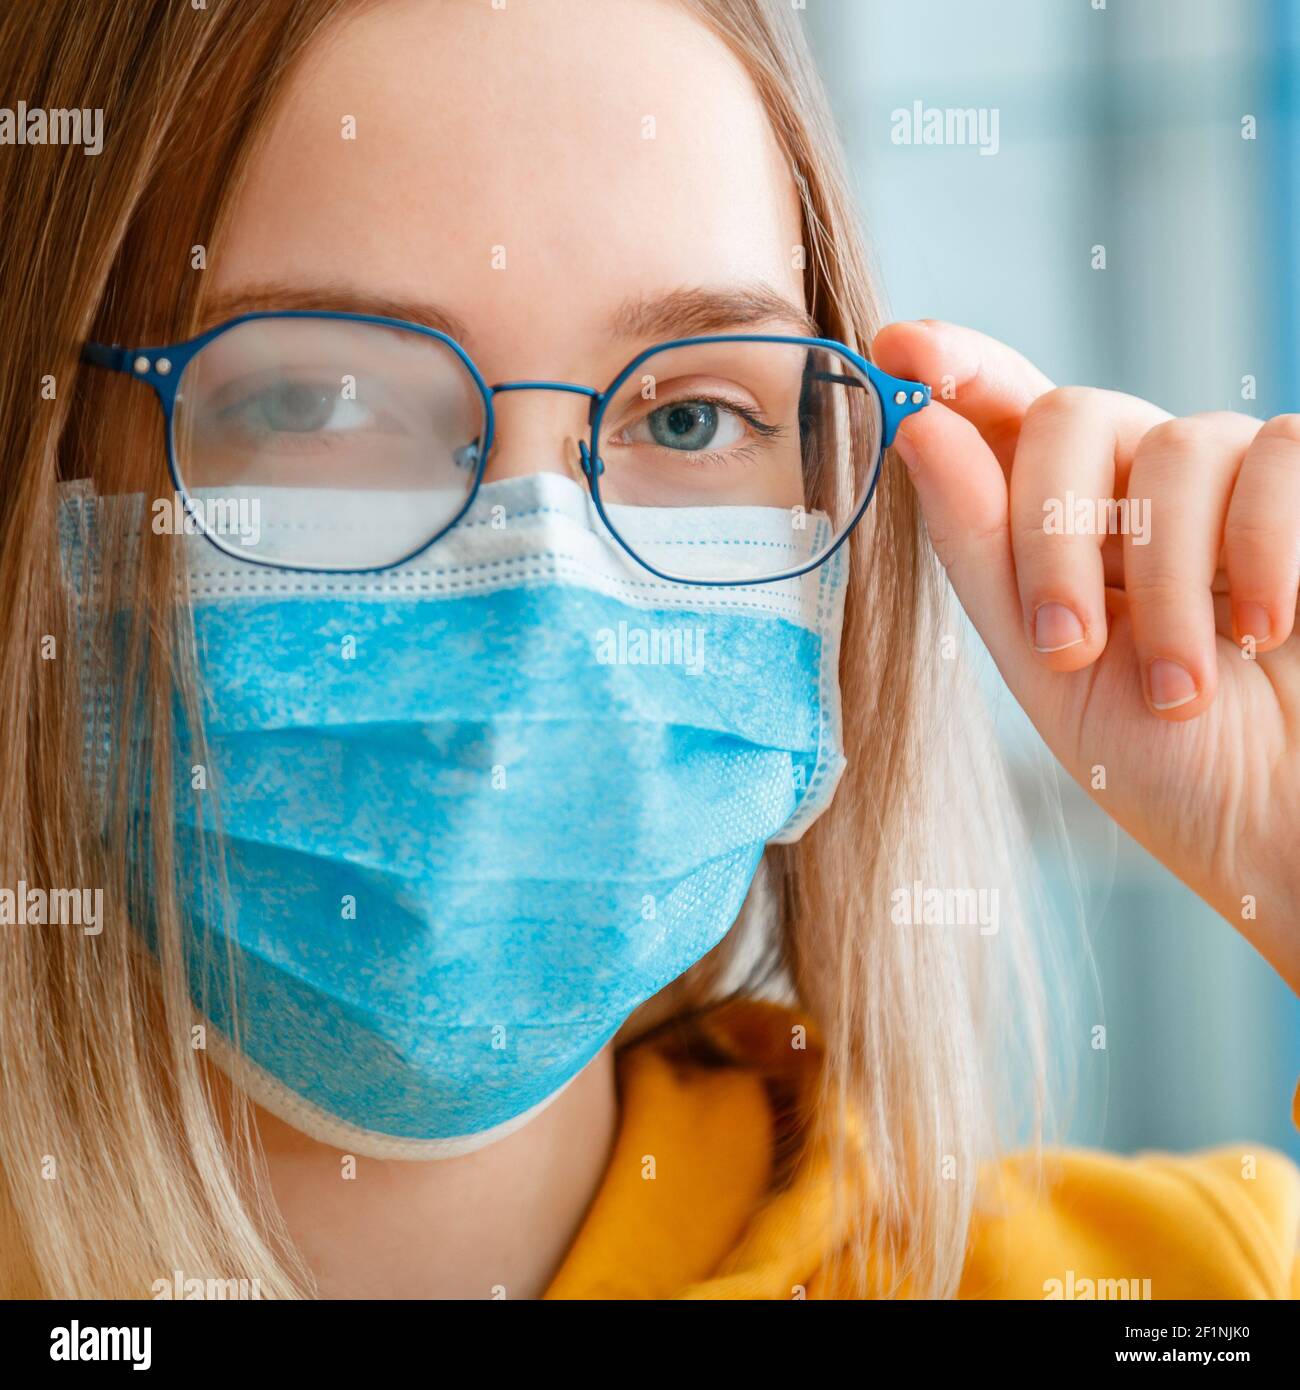 Foggy glasses wearing on young woman. close up portrait. Teenager girl in blue medical protective face mask and eyeglasses wipes blurred foggy misted Stock Photo